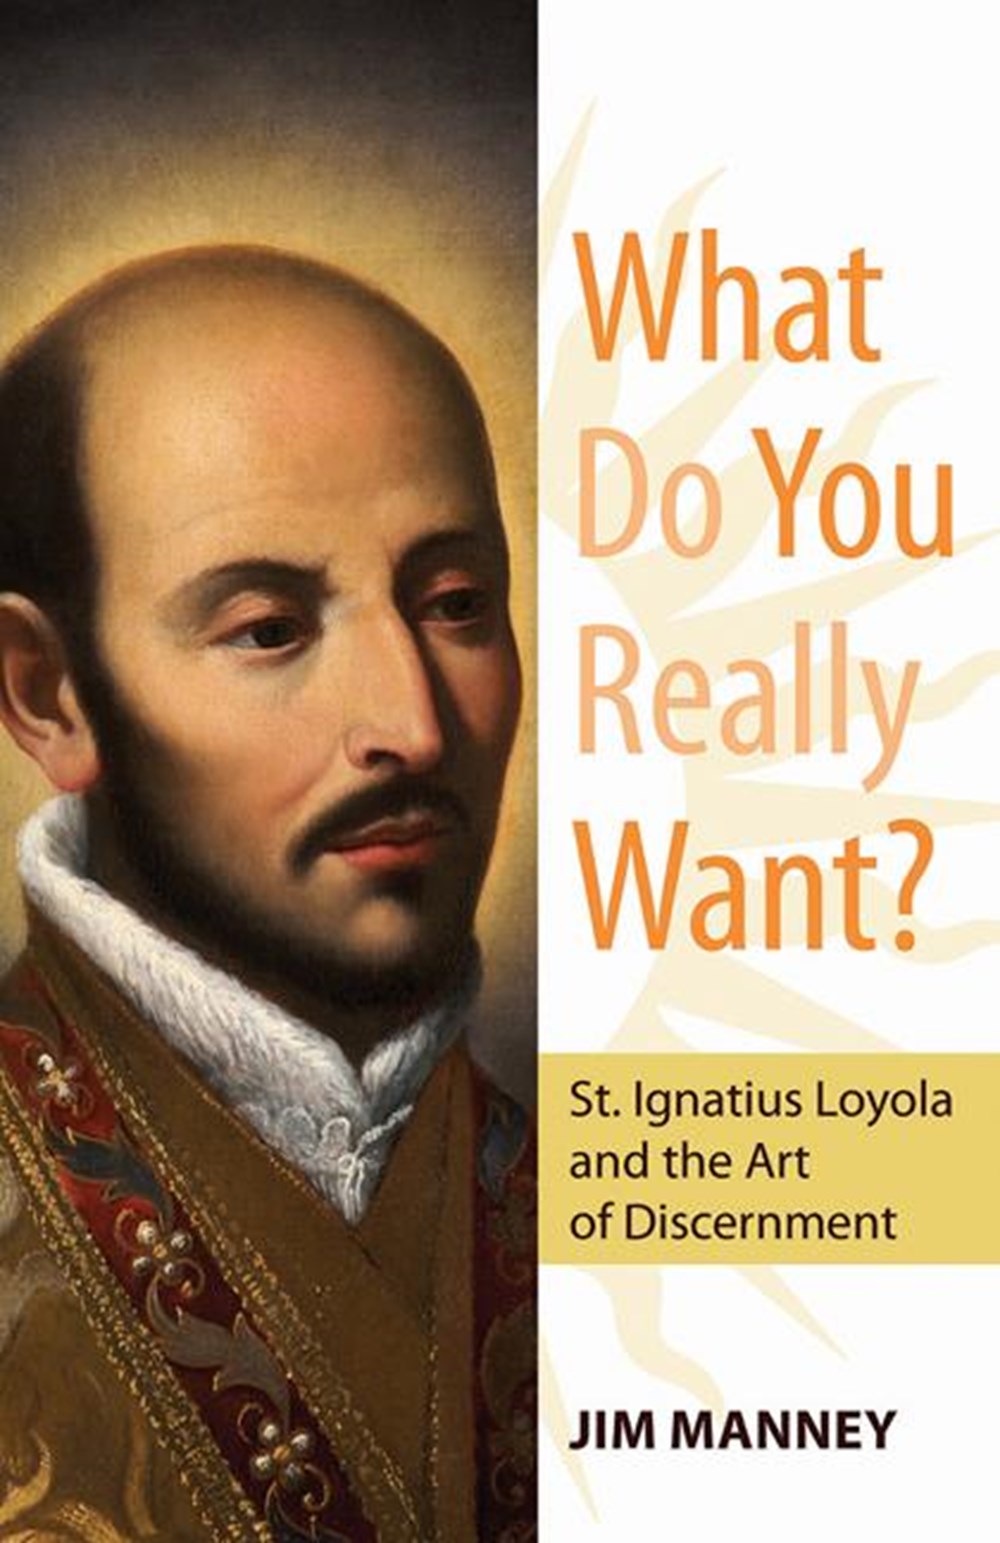 What Do You Really Want?: St. Ignatius Loyola and the Art of Discernment